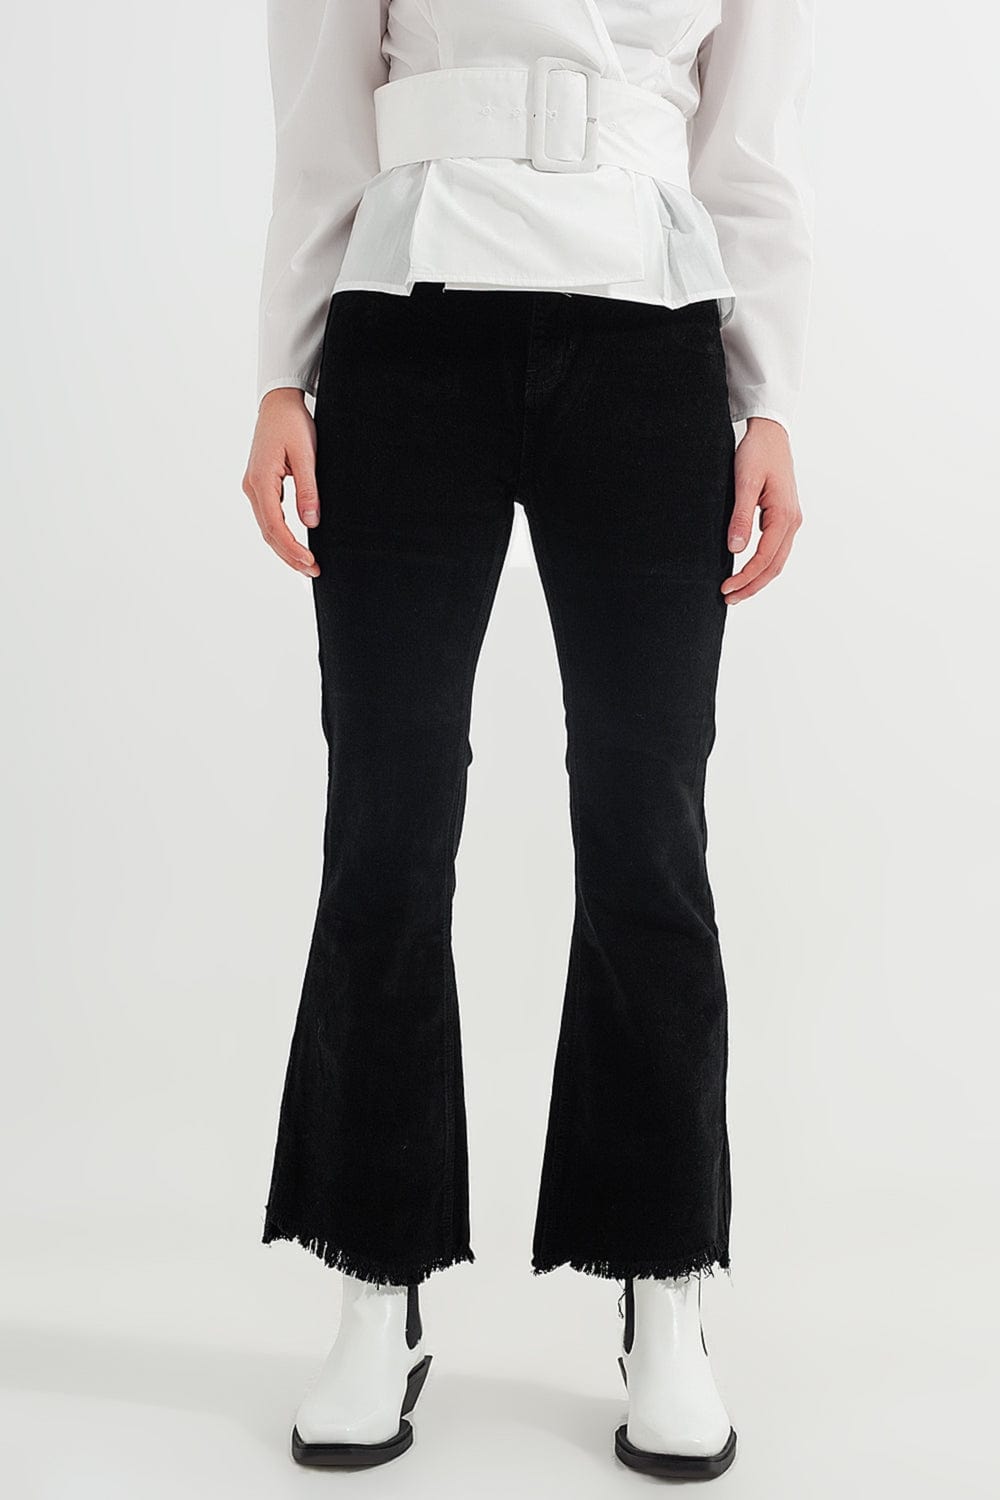 Q2 Women's Jean Stretchy Cord Flared Trouser In Black